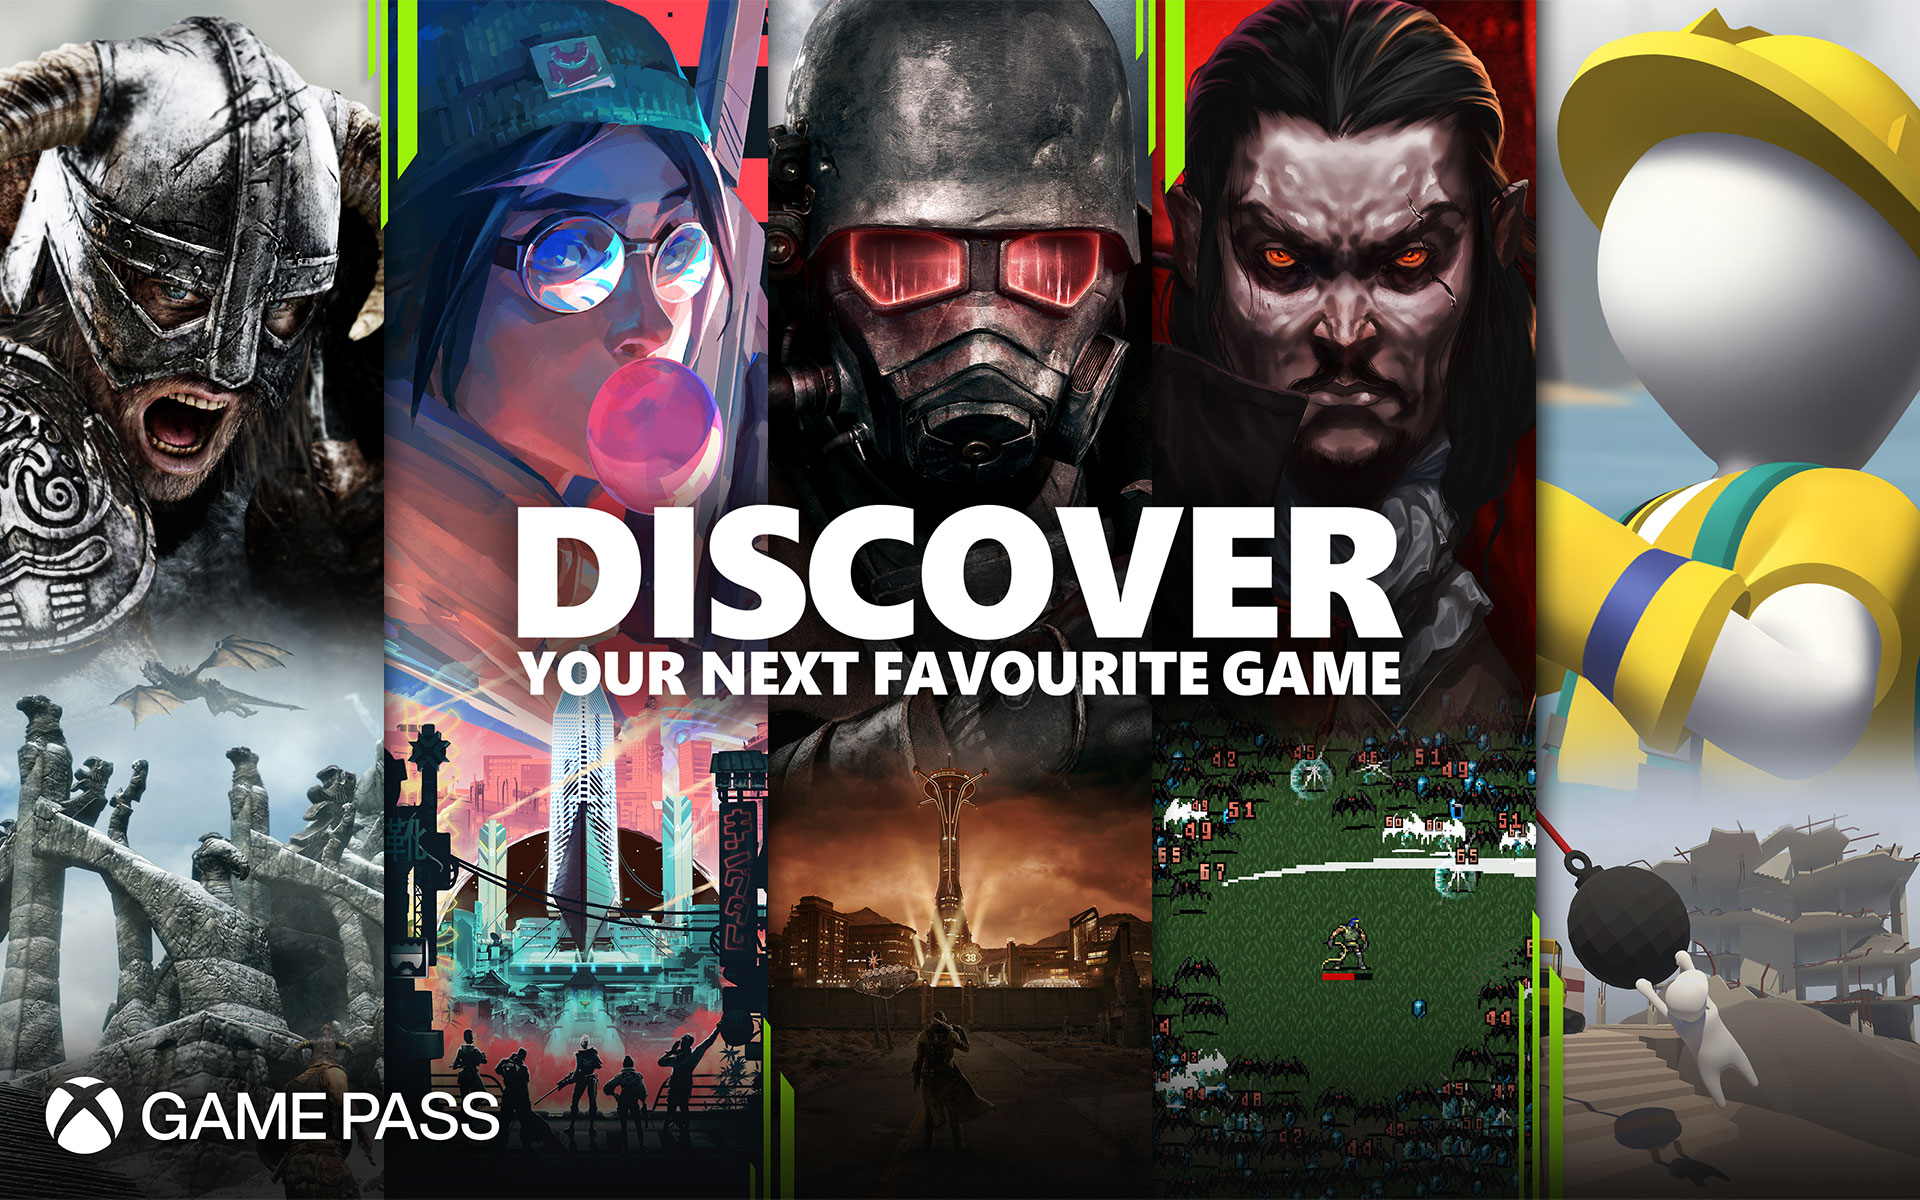 Xbox Game Pass TV Spot, 'Discover Your Next Favorite Game' Song by